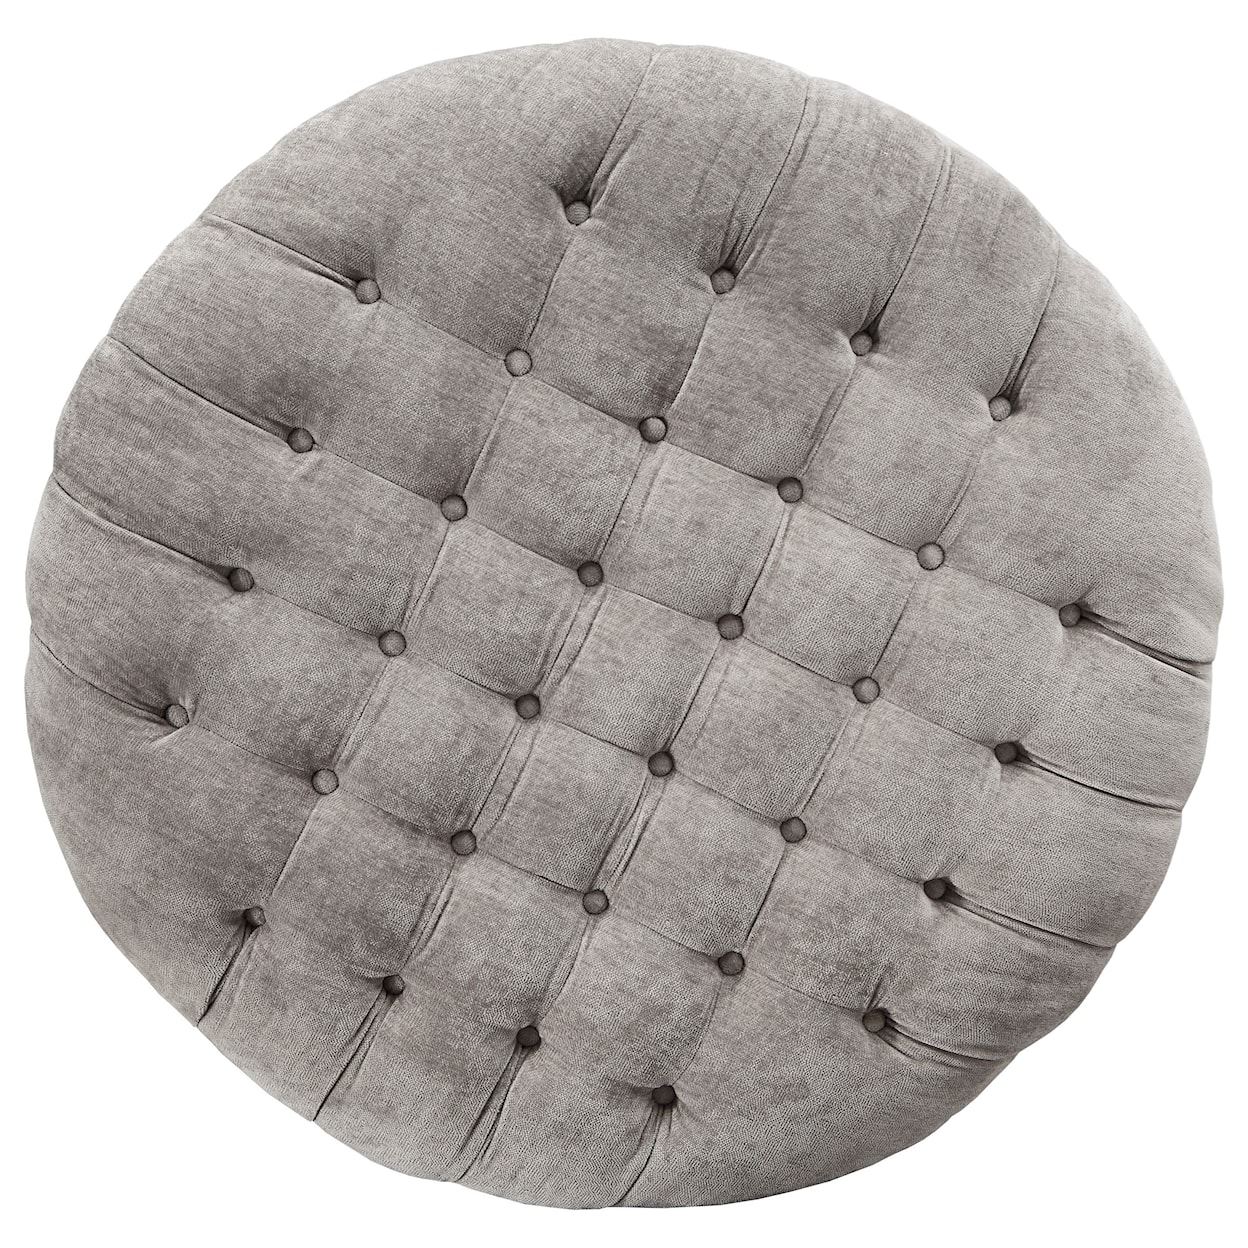 Signature Design by Ashley Furniture Carnaby Oversized Accent Ottoman